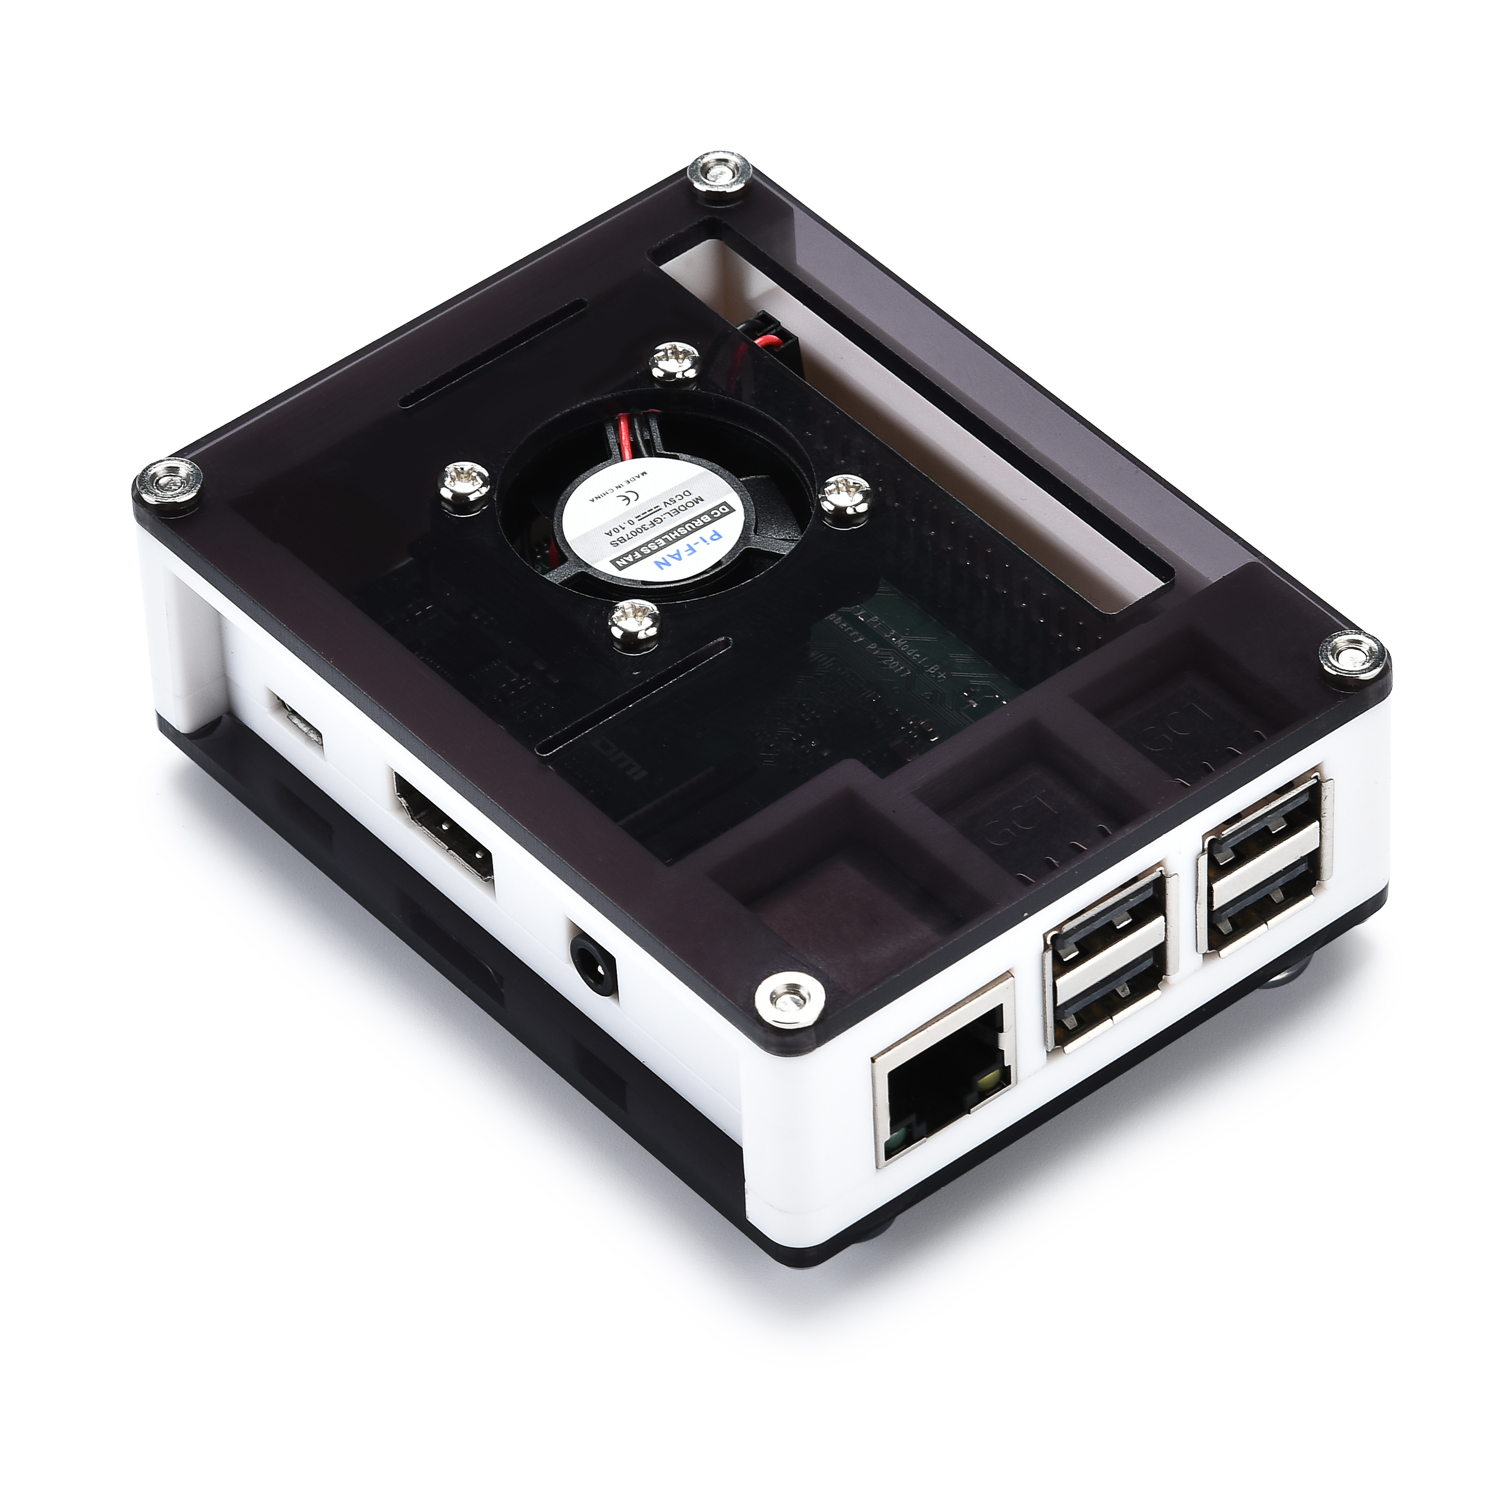 

3-in-1 ABS Enclosure Protective Case + Cooling Fan + Heatsink Kit for Raspberry Pi 3B+ / 3B / 2B